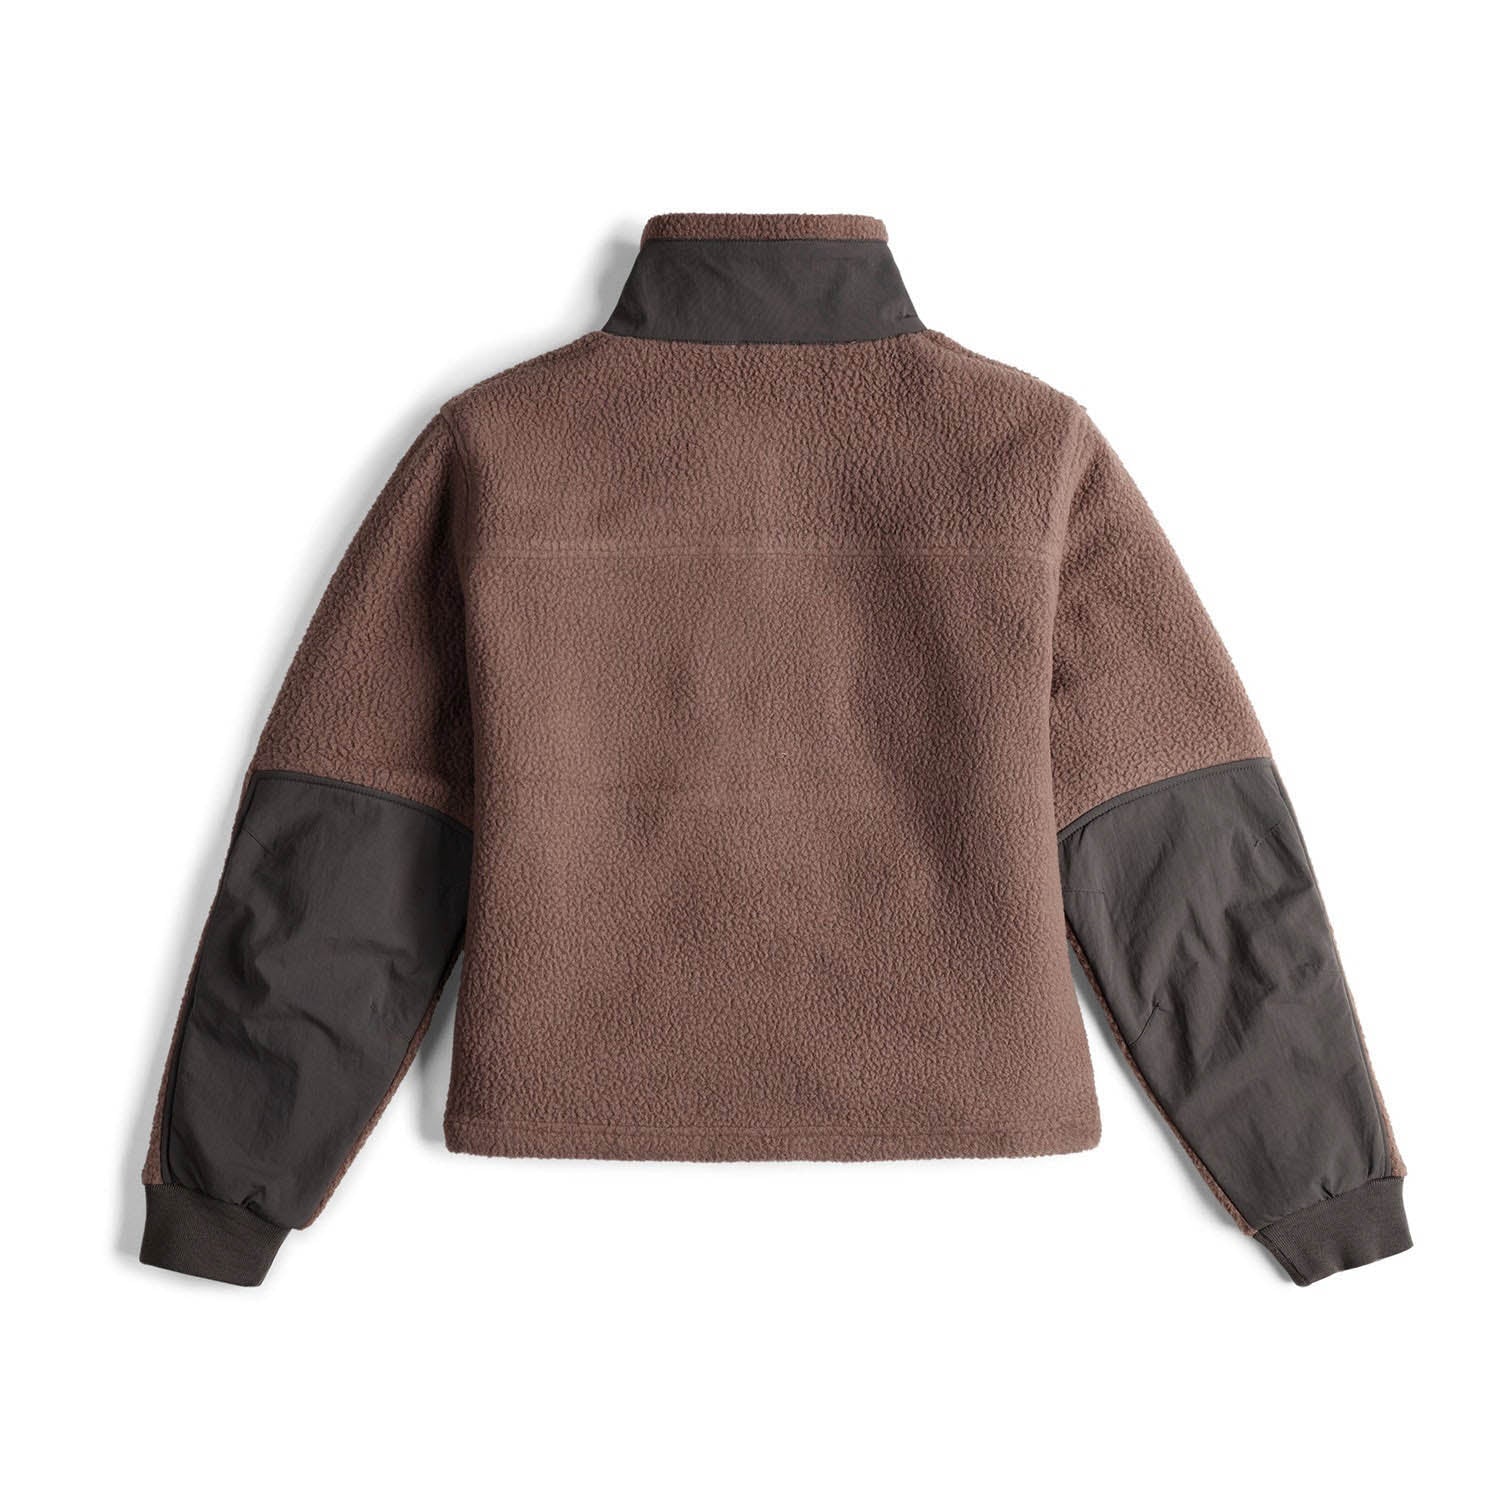 Pull - Mountain Fleece Pullover - Peppercorn Charcoal